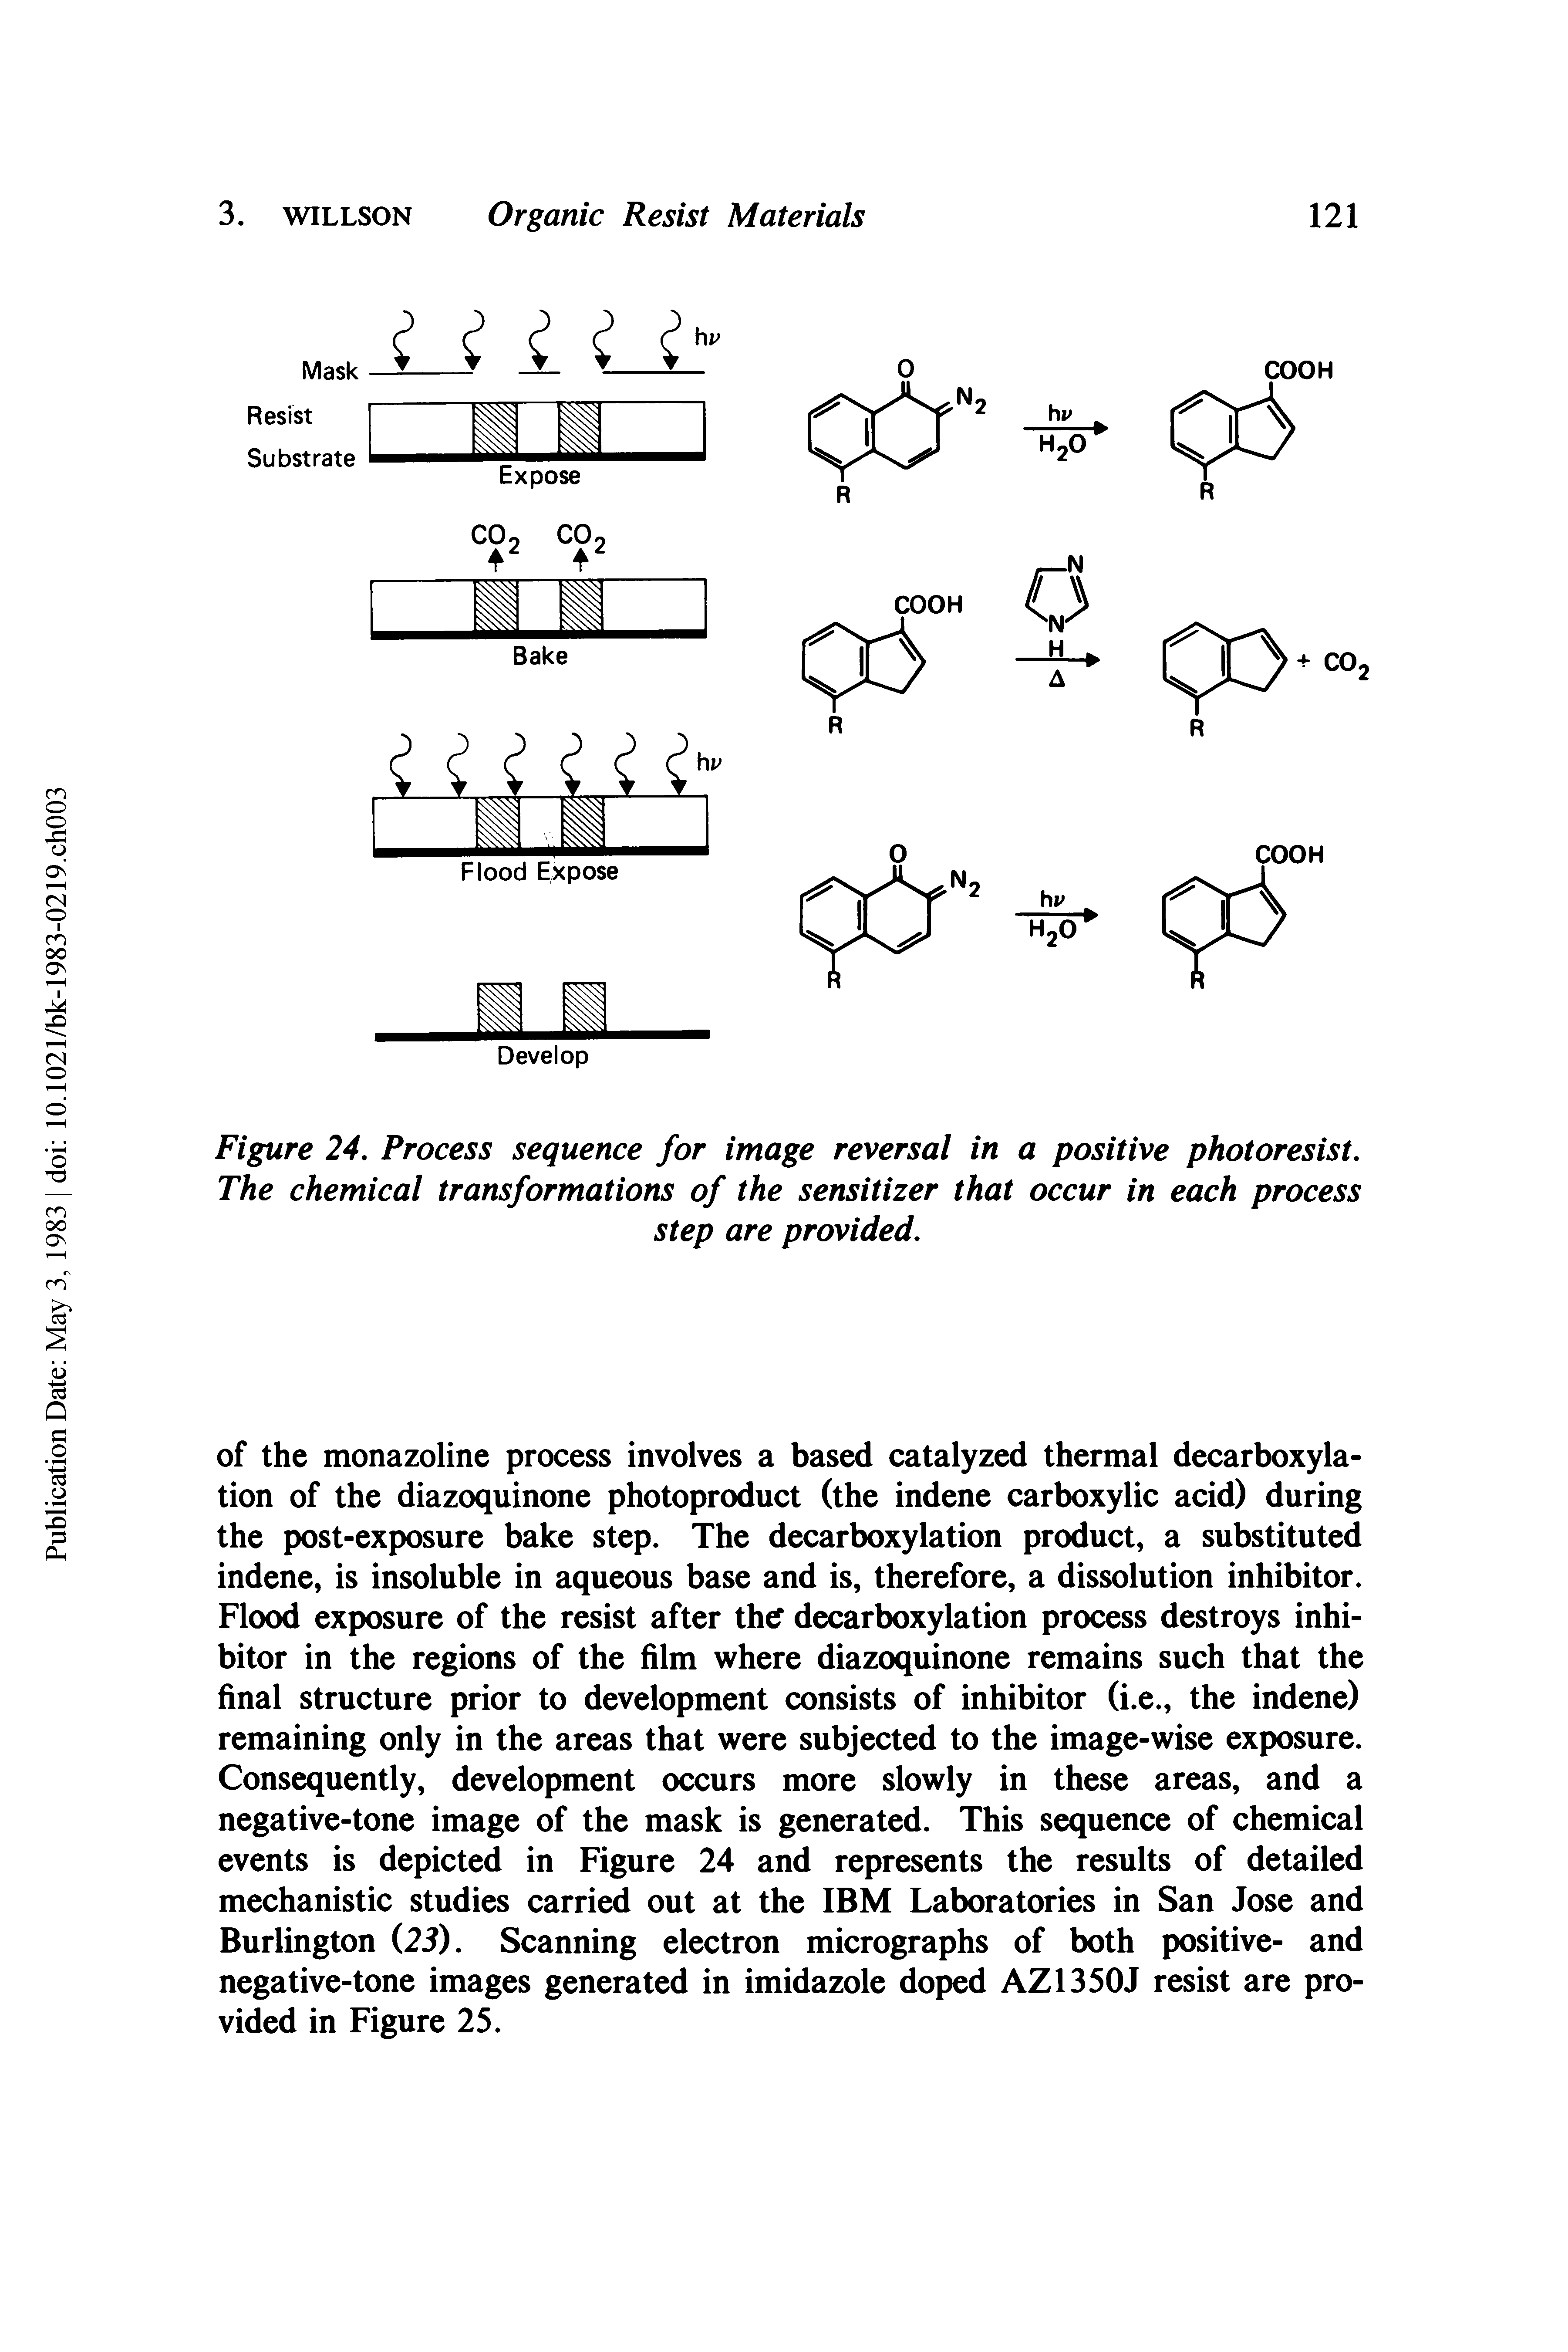 Figure 24. Process sequence for image reversal in a positive photoresist. The chemical transformations of the sensitizer that occur in each process...